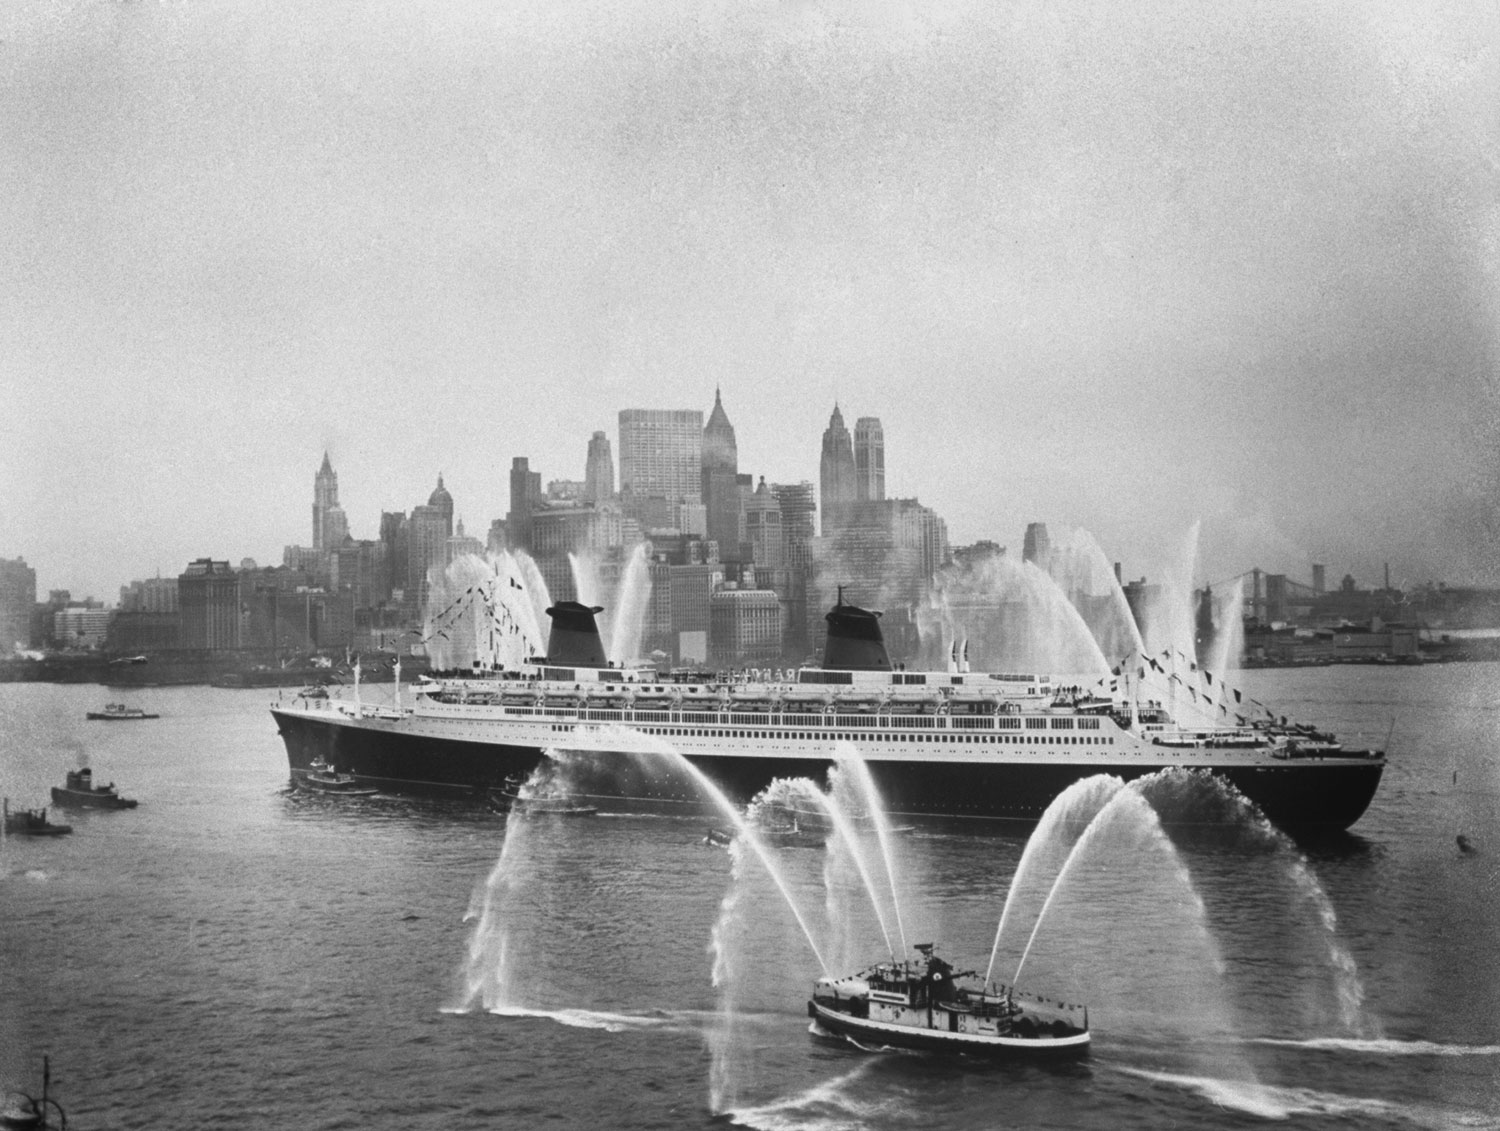 Fire boats greet the SS France as it enters New York Harbor on its maiden voyage in February 1962.